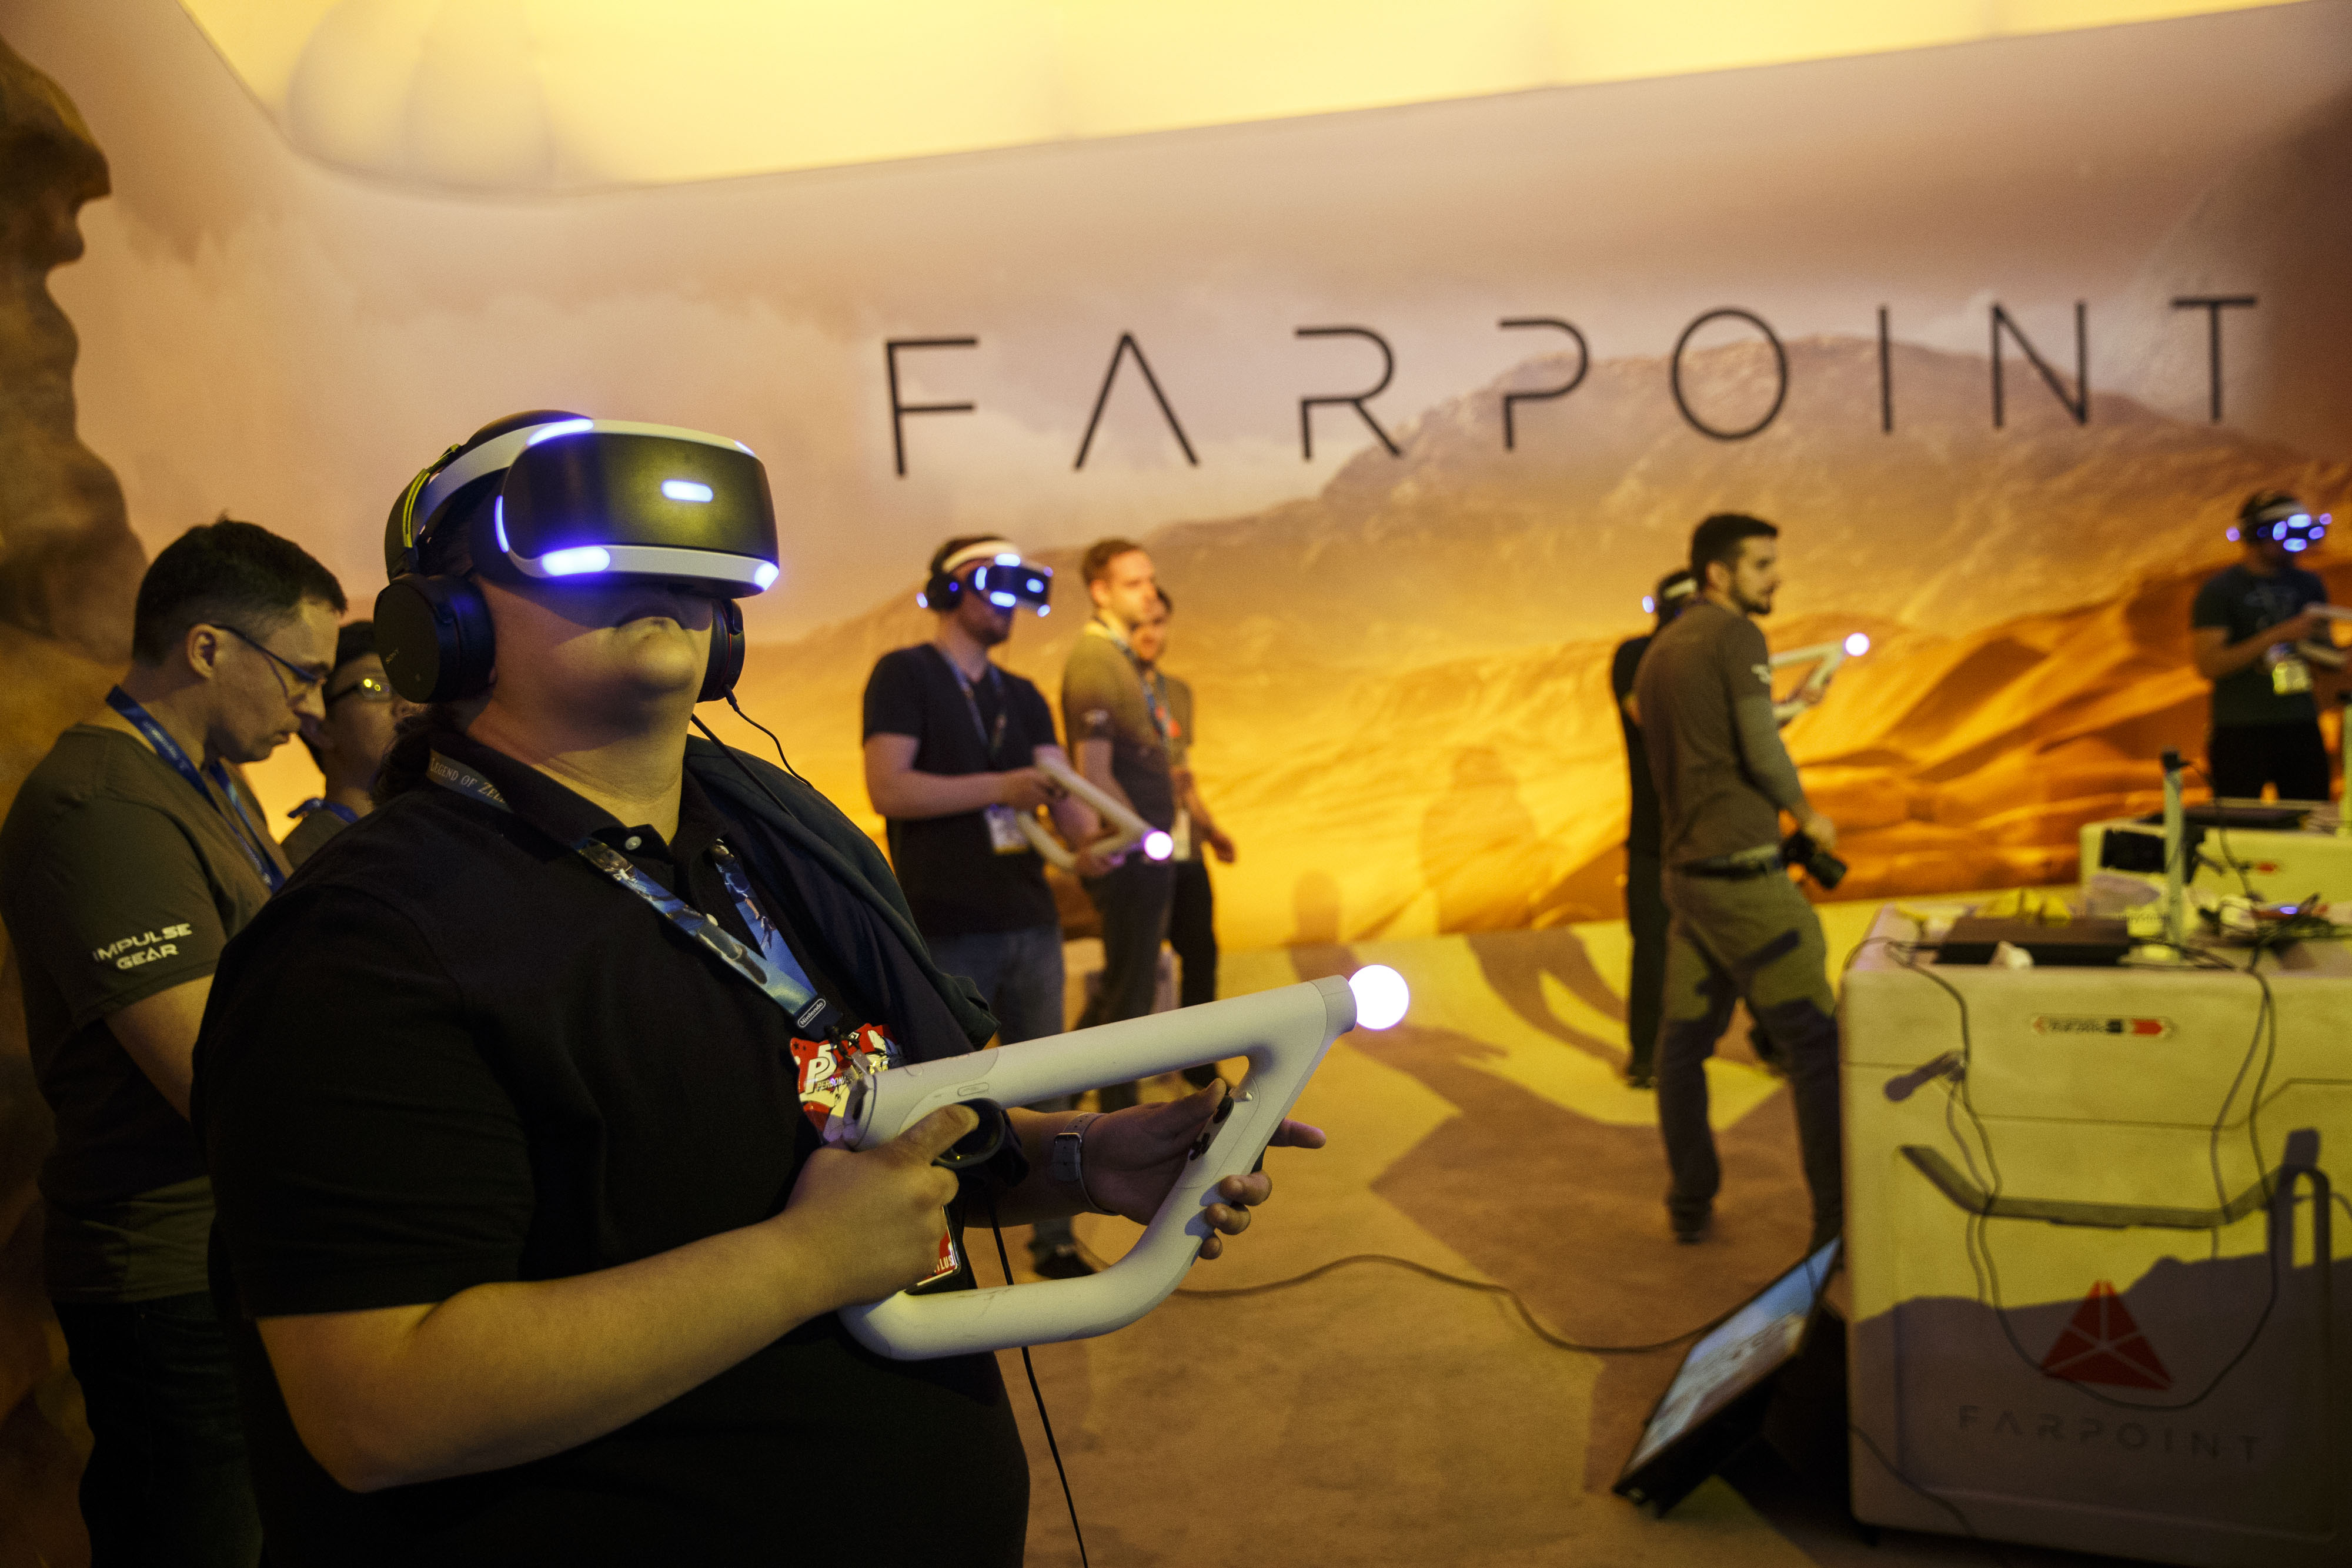 Attendees use Sony Corp. PlayStation virtual reality (VR) Aim Controllers and headsets to play "Farpoint" during the E3 Electronic Entertainment Expo in Los Angeles, California, U.S., on Wednesday, June 15, 2016. E3, a trade show for computer and video games, draws professionals to experience the future of interactive entertainment as well as to see new technologies and never-before-seen products. Photographer: Patrick T. Fallon/Bloomberg via Getty Images (Bloomberg&mdash;Bloomberg via Getty Images)